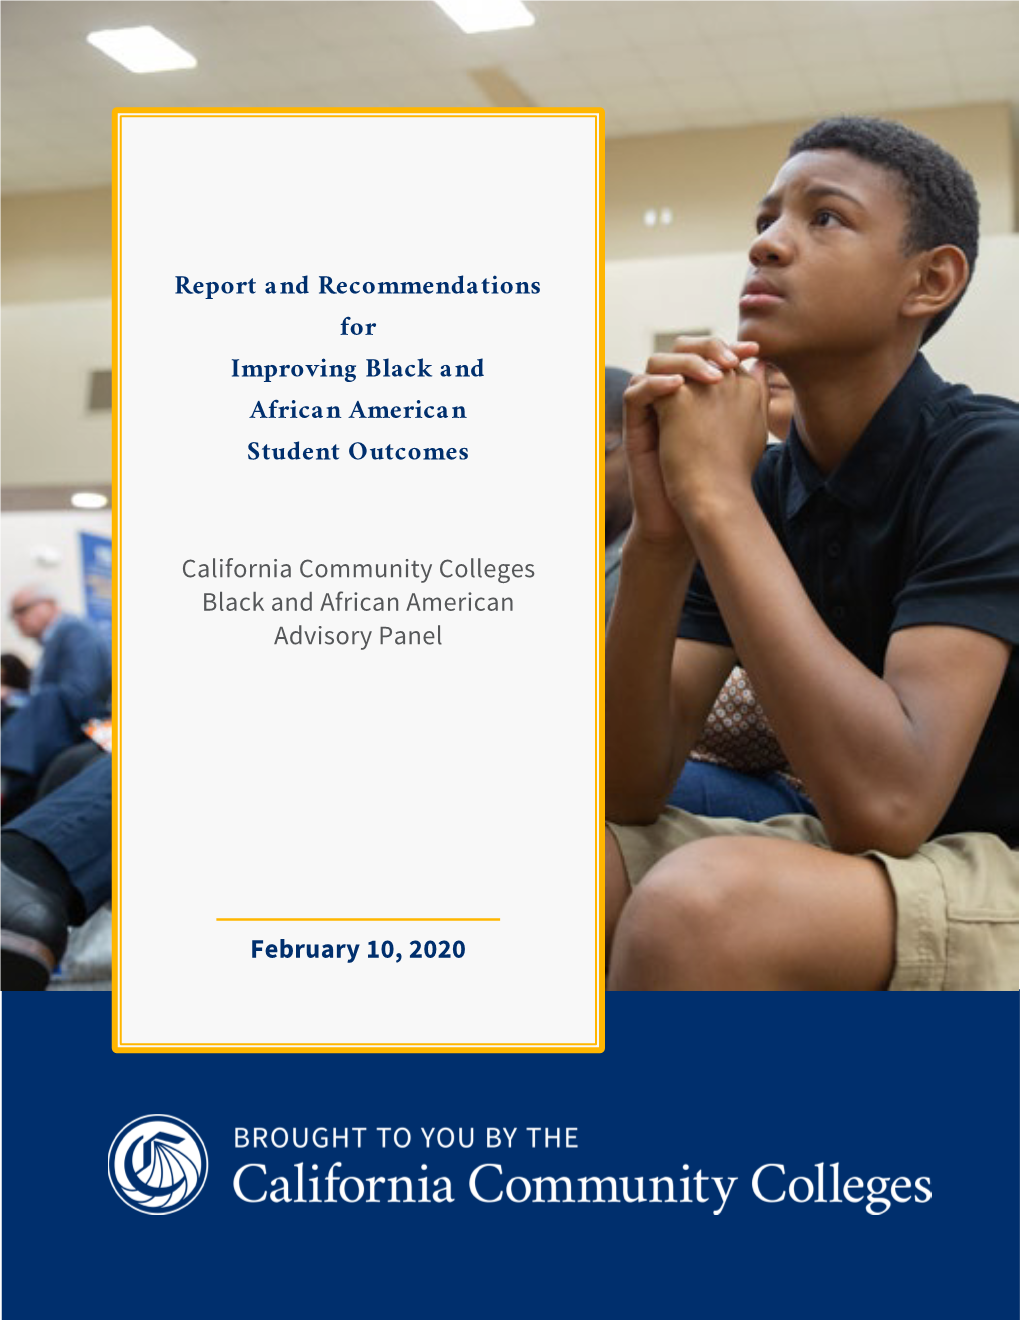 Report and Recommendations for Improving Black and African American Student Outcomes